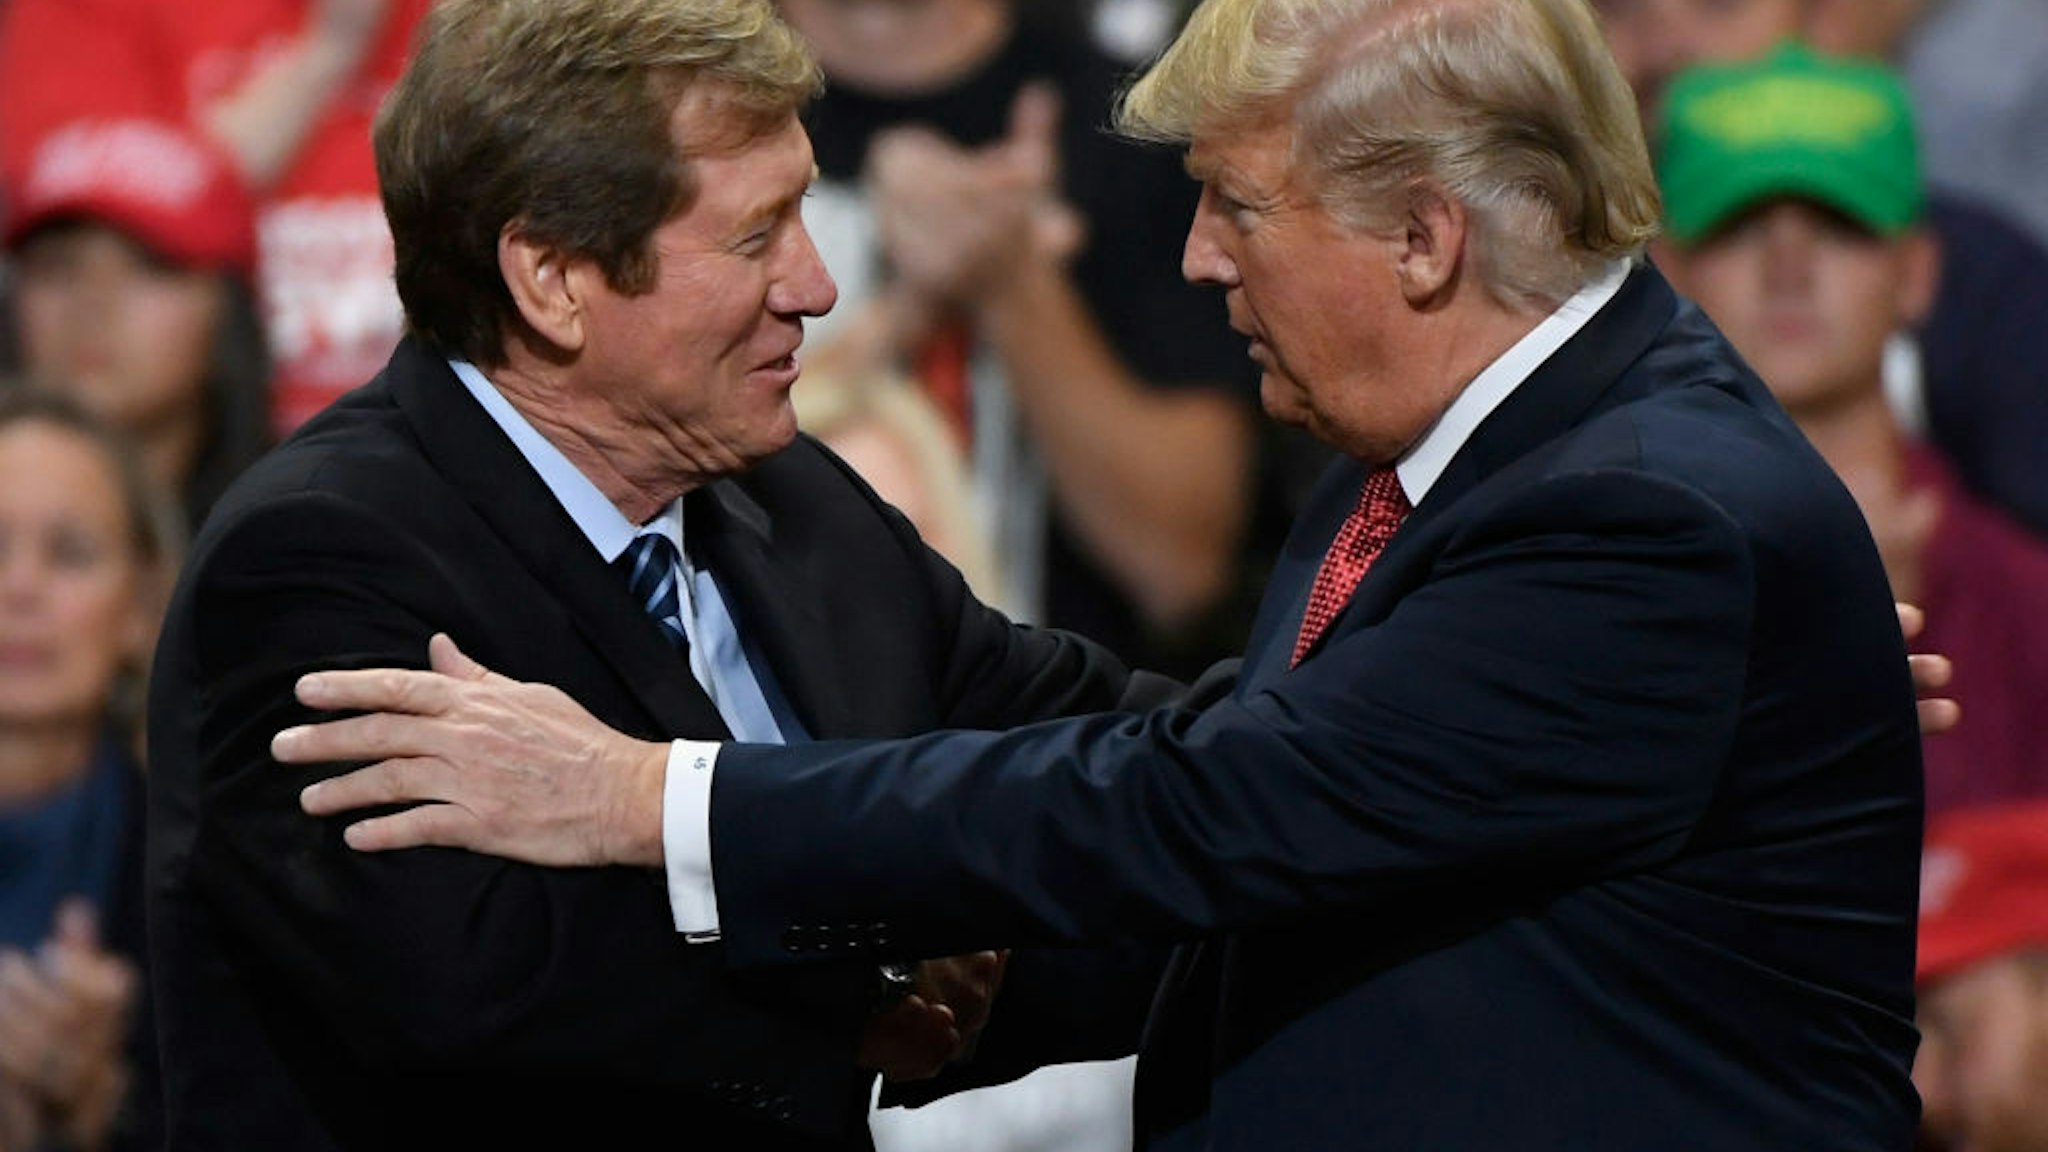 US President Donald Trump greets Jason Lewis, Republican US Congressman from Minnesota's 2nd district, at a campaign rally on October 4, 2018 at Mayo Civic Center in Rochester, Minnesota.